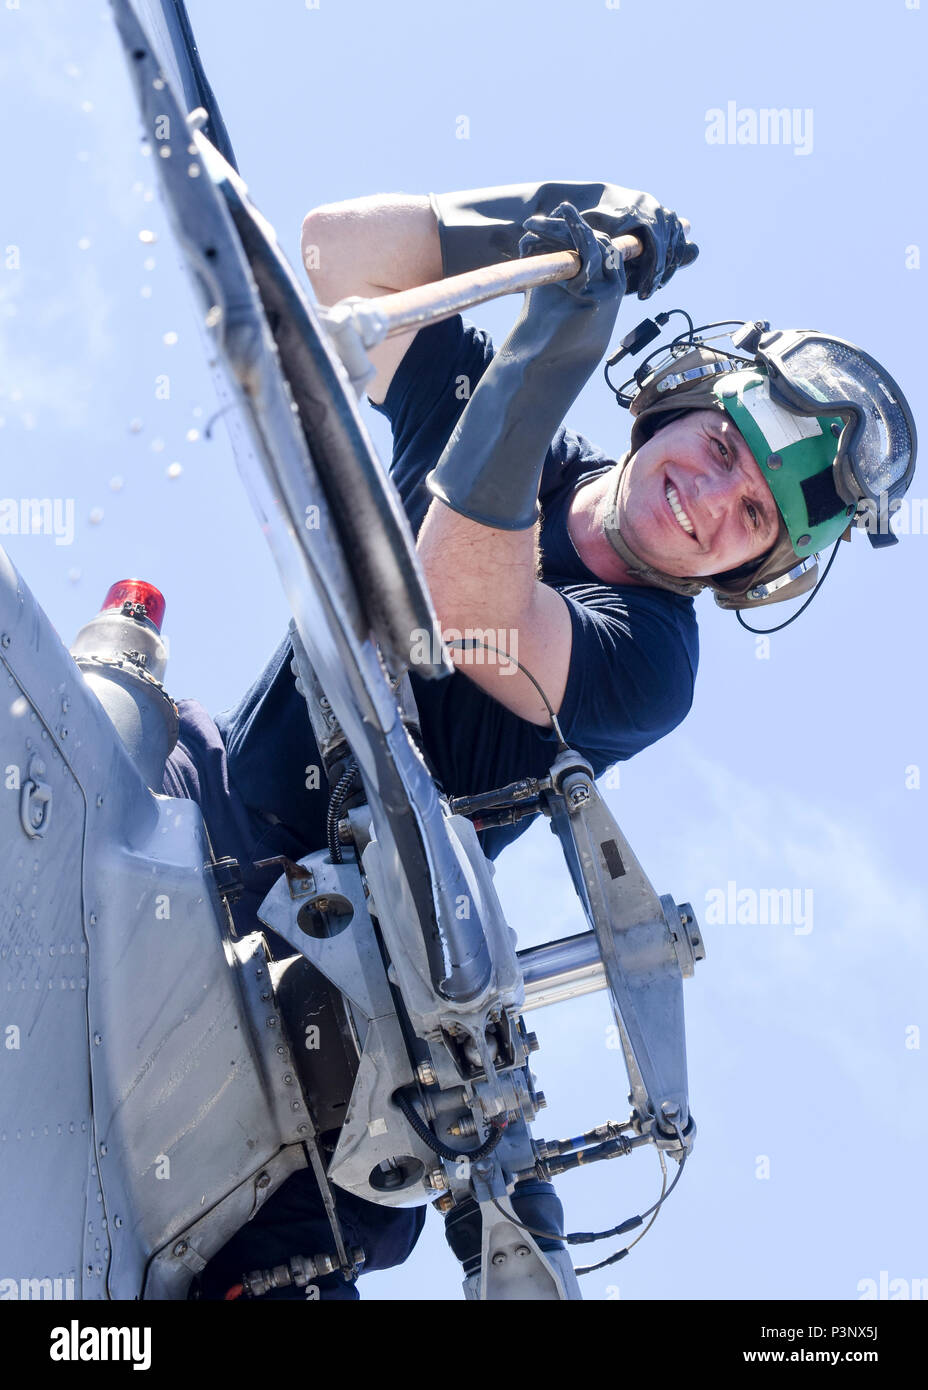 160713-N-LI612-437 PACIFIC OCEAN (July 13, 2016) Aviation Electronics Technician 2nd Class Trey Perry, of Windsor, California, assigned to Helicopter Maritime Strike Squadron (HSM) 35, “The Magicians”, washes the tail rotor of an MH-60R Sea Hawk helicopter on the flight deck of the Arleigh Burke-class Guided-missile destroyer USS Pinckney (DDG 91) in preparation for flight operations during RIMPAC. Arleigh Burke-class guided missile destroyer USS Pinckney (DDG 91). Twenty-six nations, more than 40 ships and submarines, more than 200 aircraft and 25,000 personnel are participating in RIMPAC fro Stock Photo